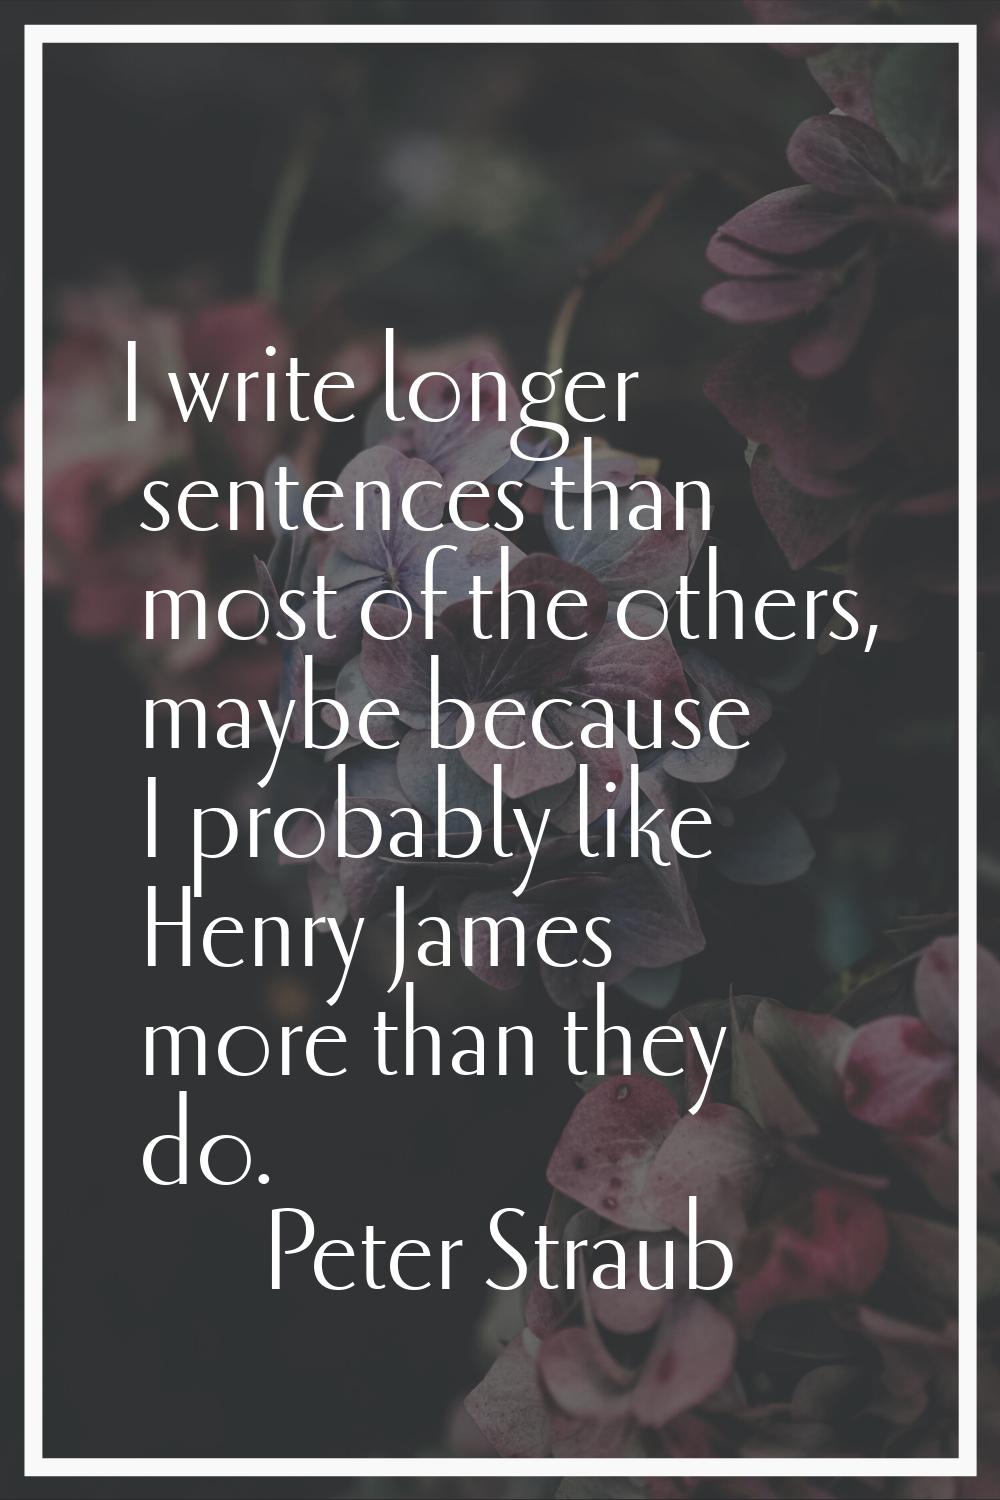 I write longer sentences than most of the others, maybe because I probably like Henry James more th